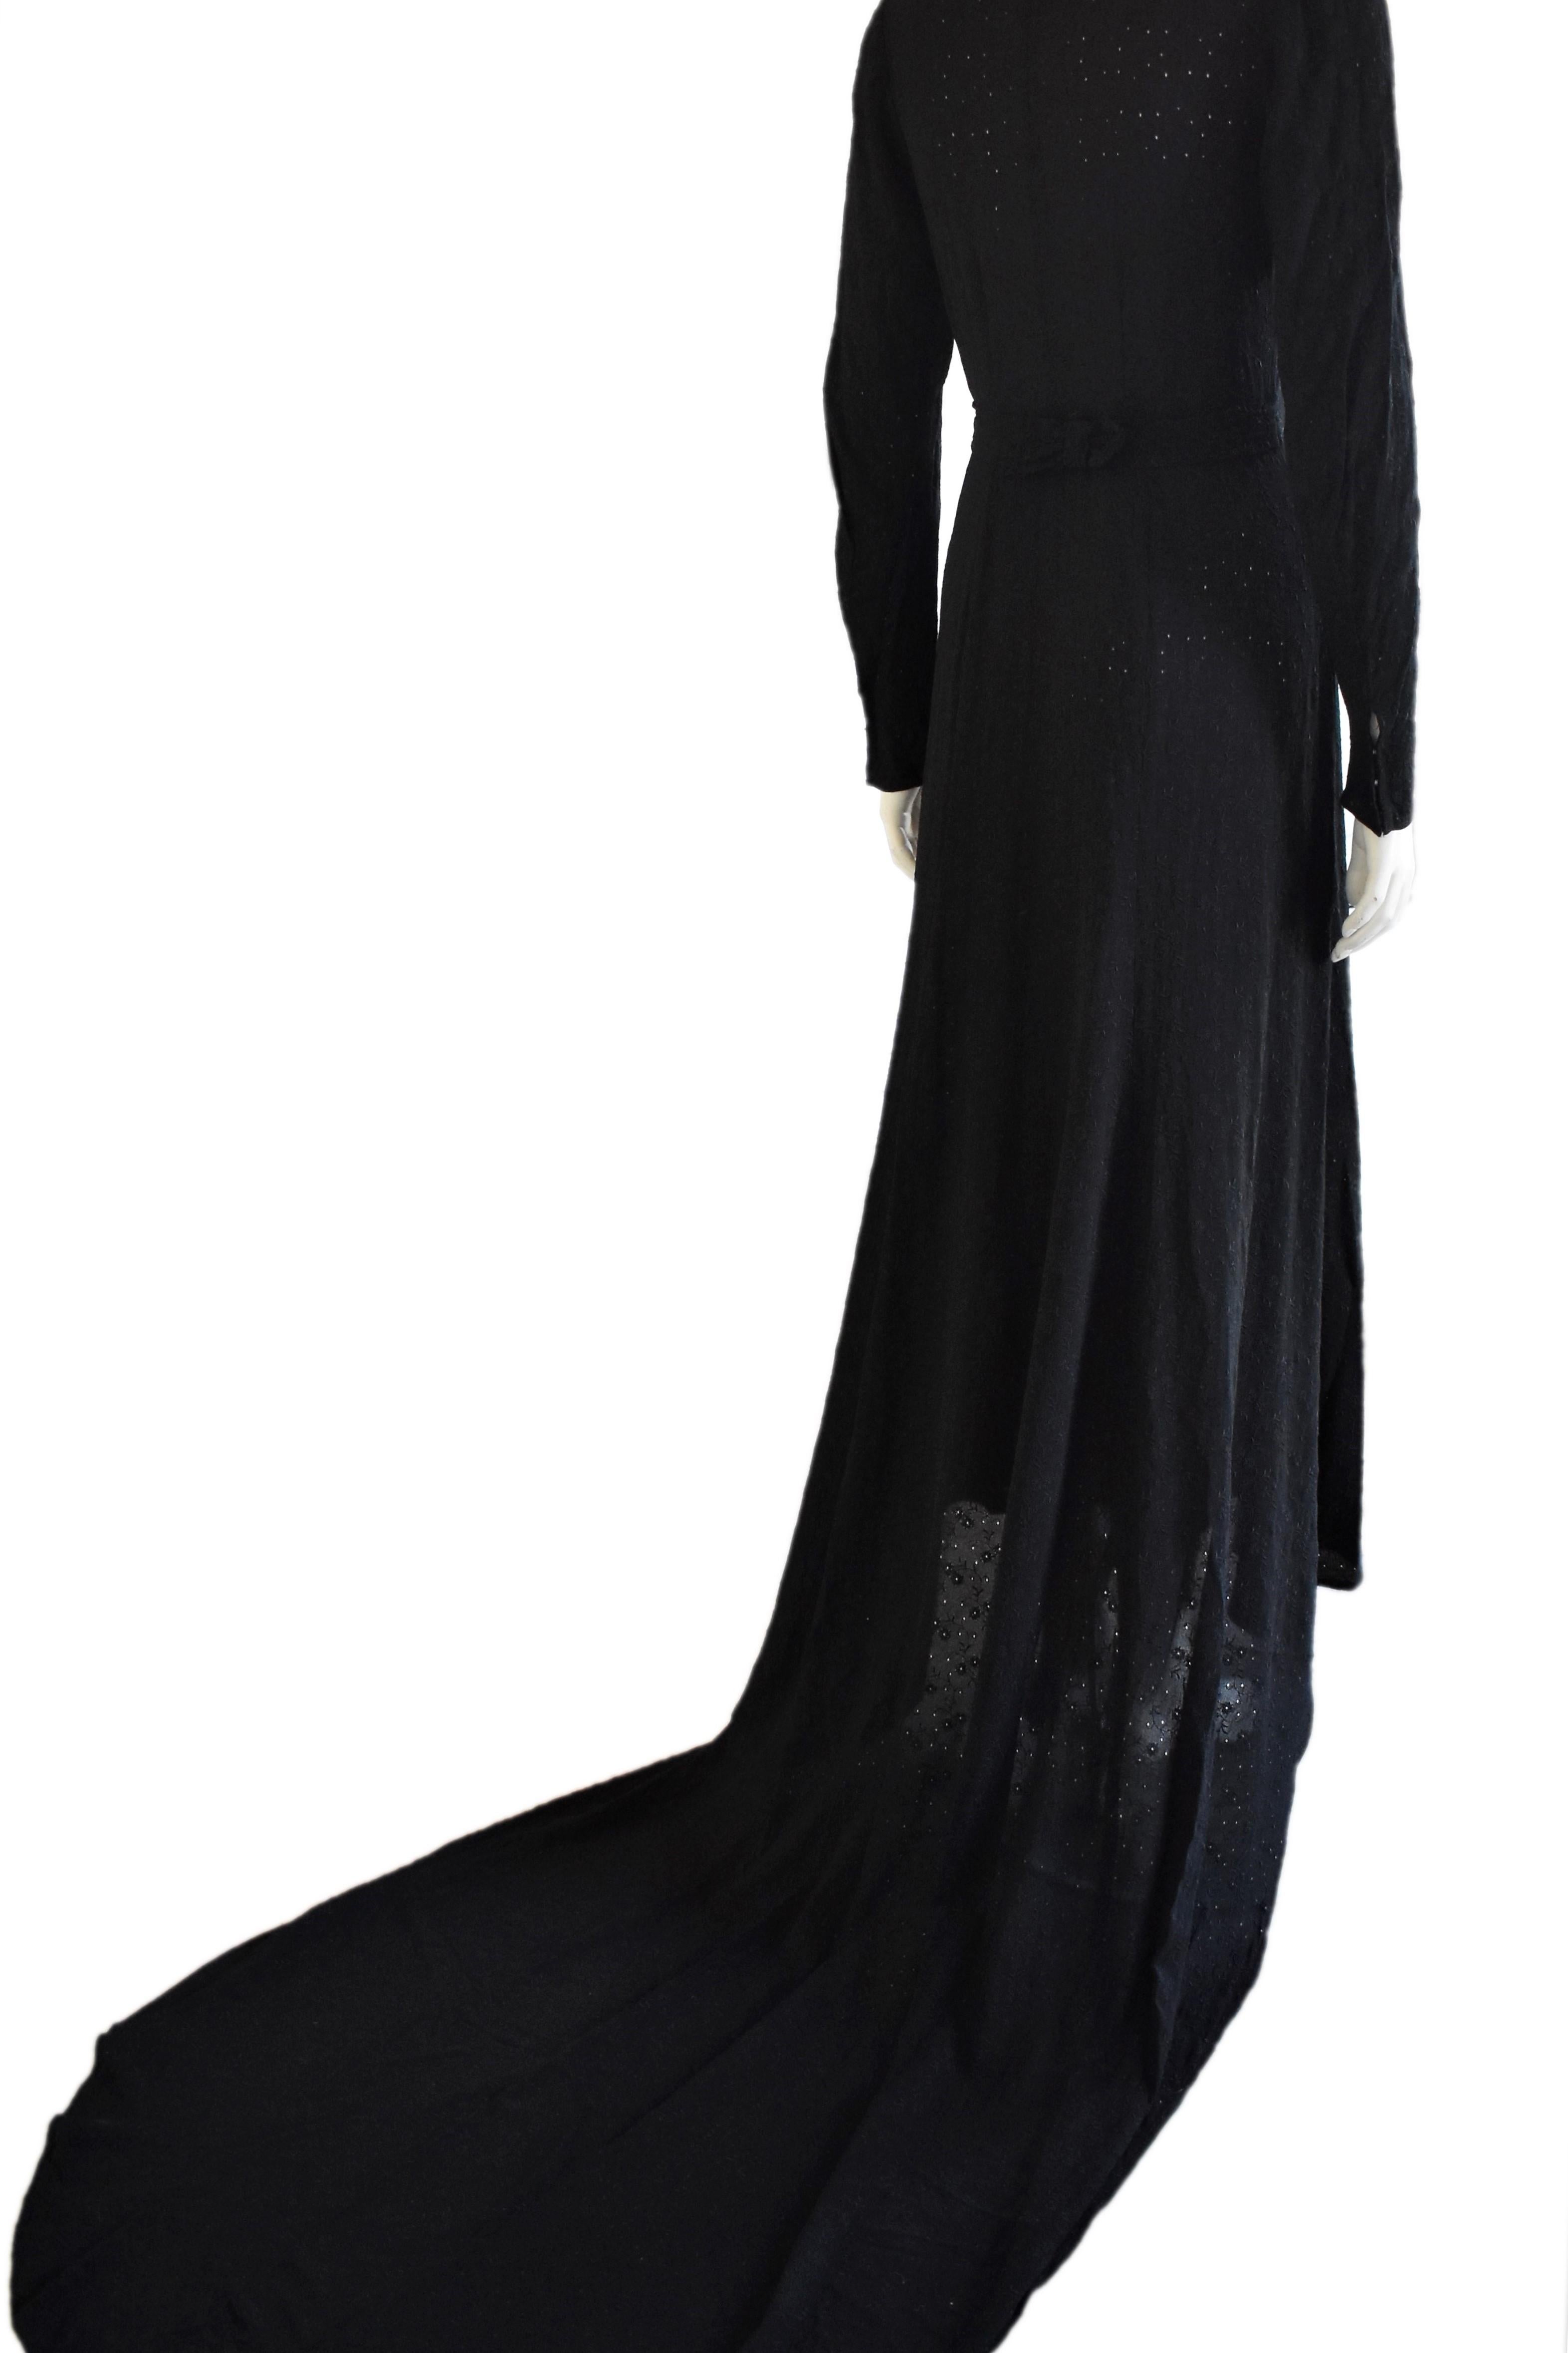 FINAL SALE Vintage Embroidered Hand-Made 1940's Black Gown with Long Train im Zustand „Gut“ im Angebot in Amsterdam, NL